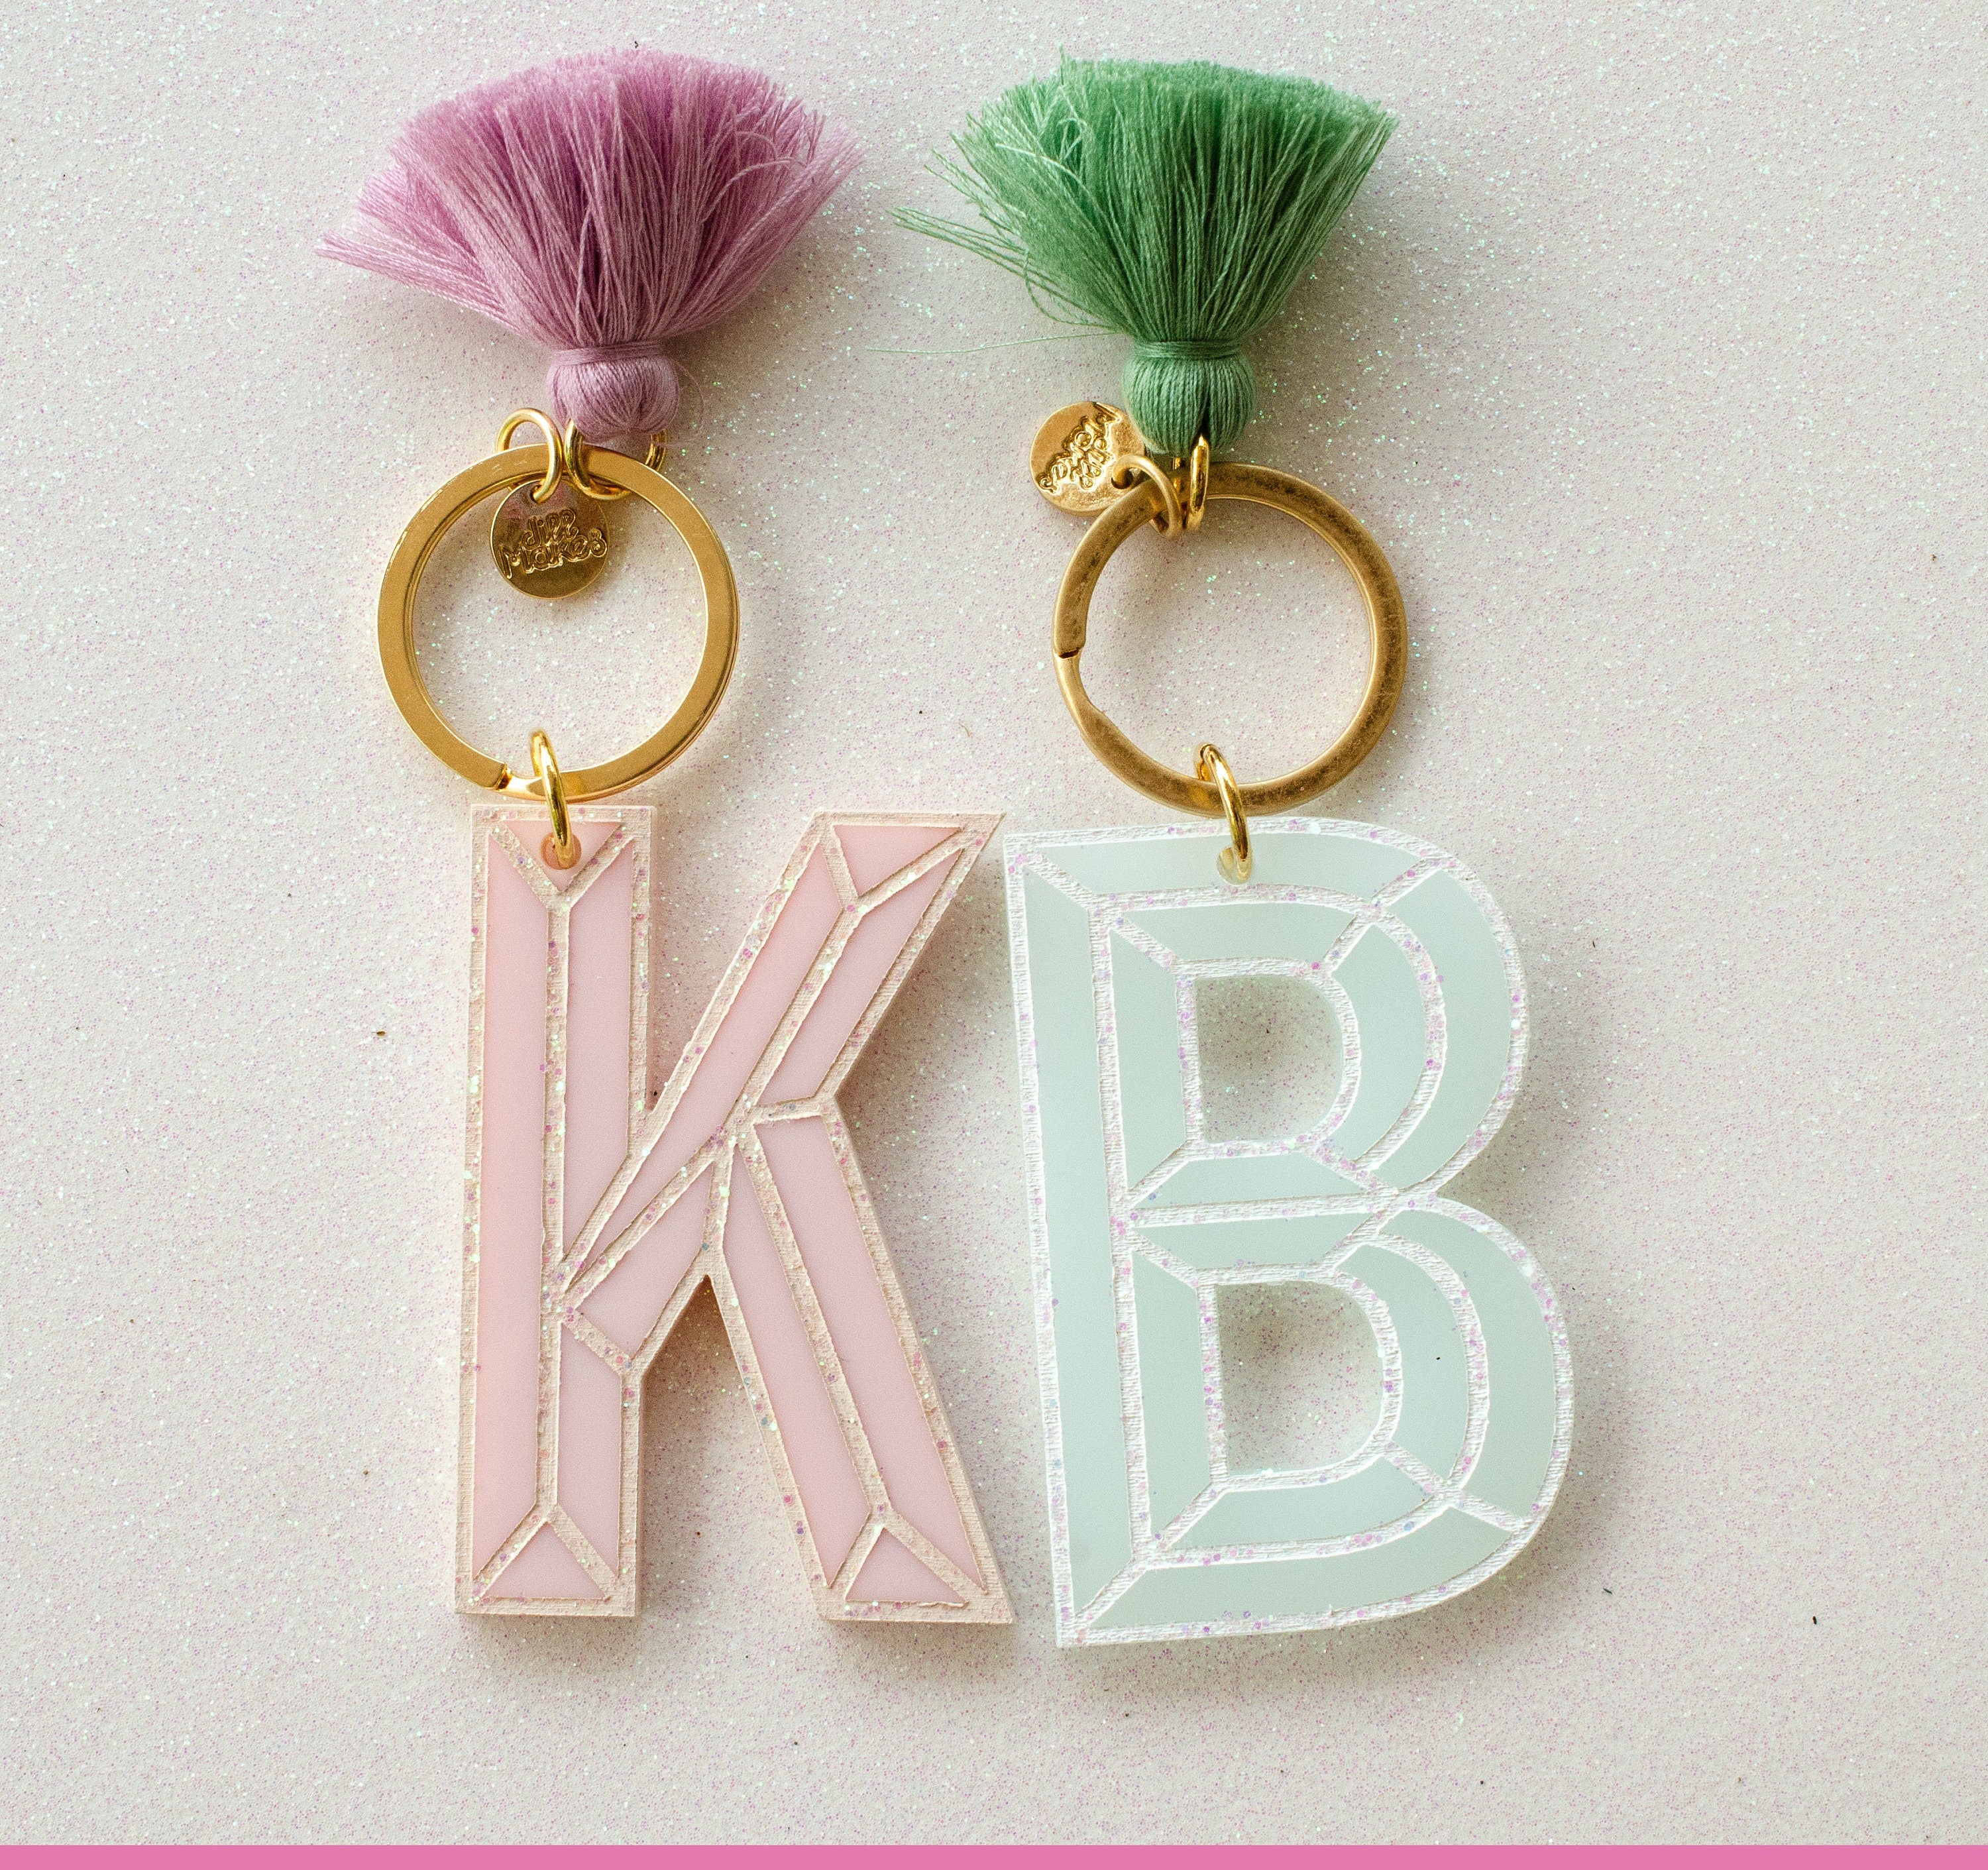 Custom Letter Keychain, Initial Personalized Gifts For Her